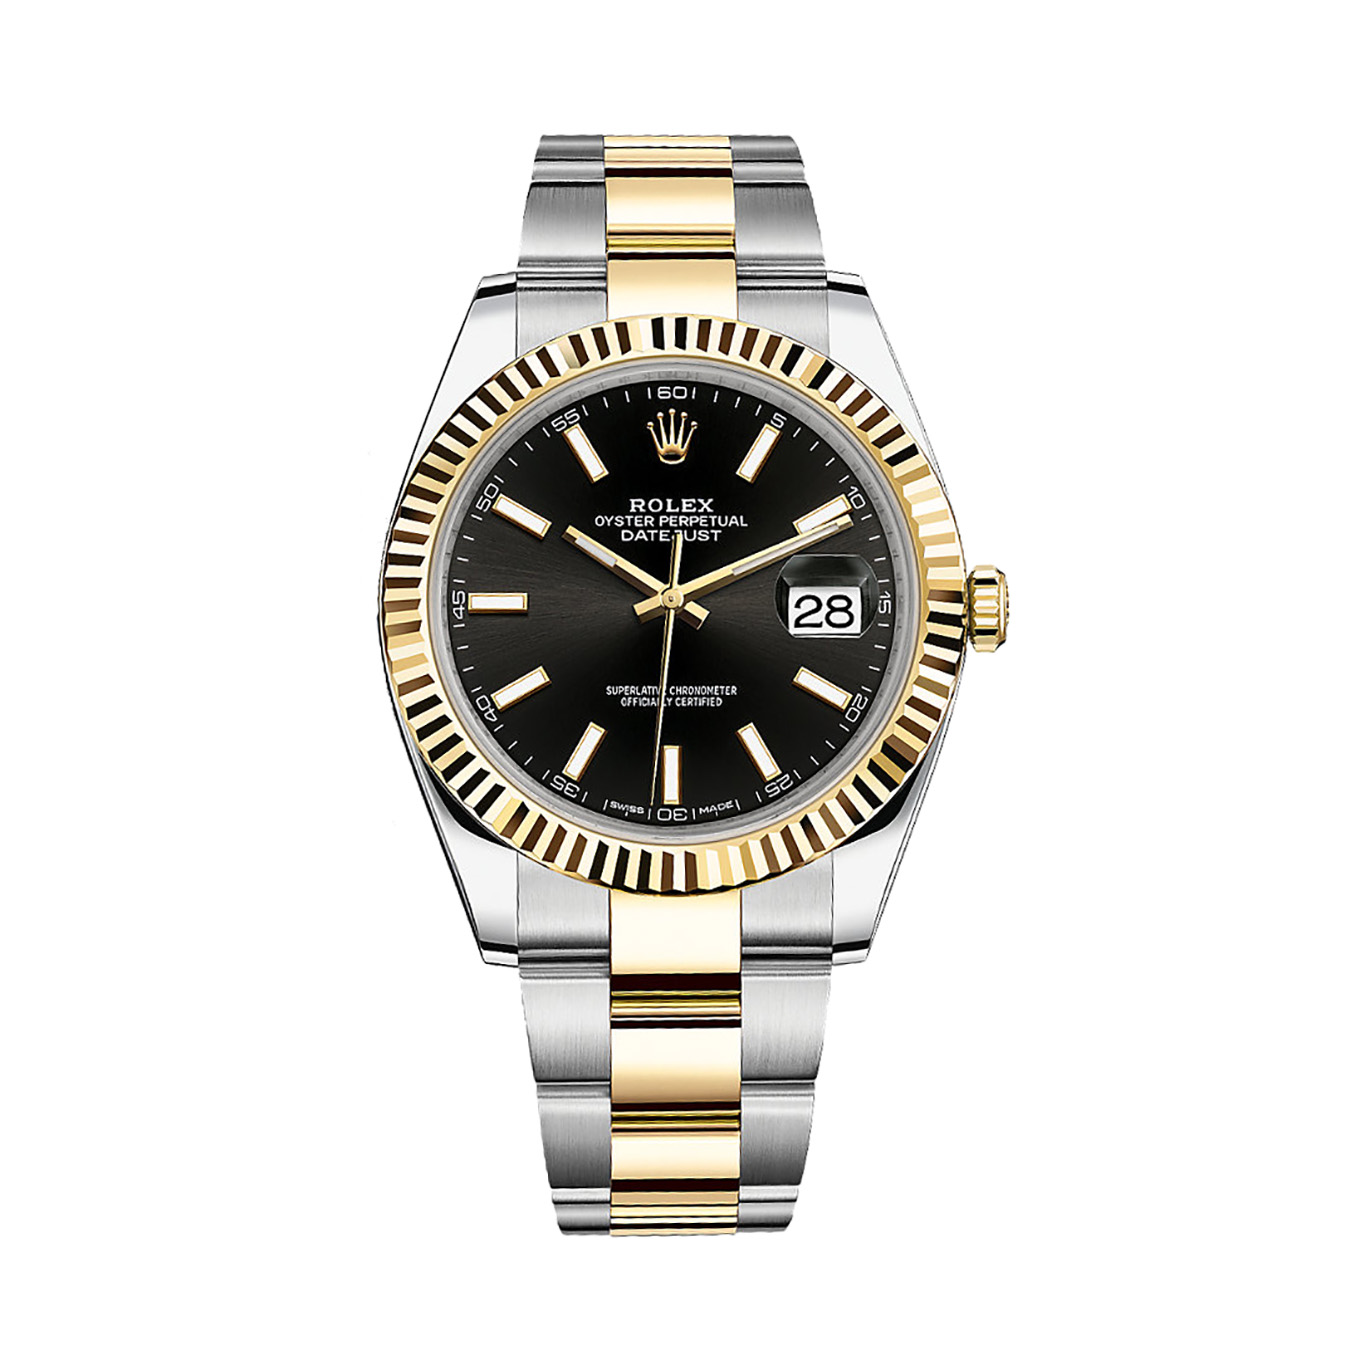 Datejust 41 126333 Gold & Stainless Steel Watch (Black)